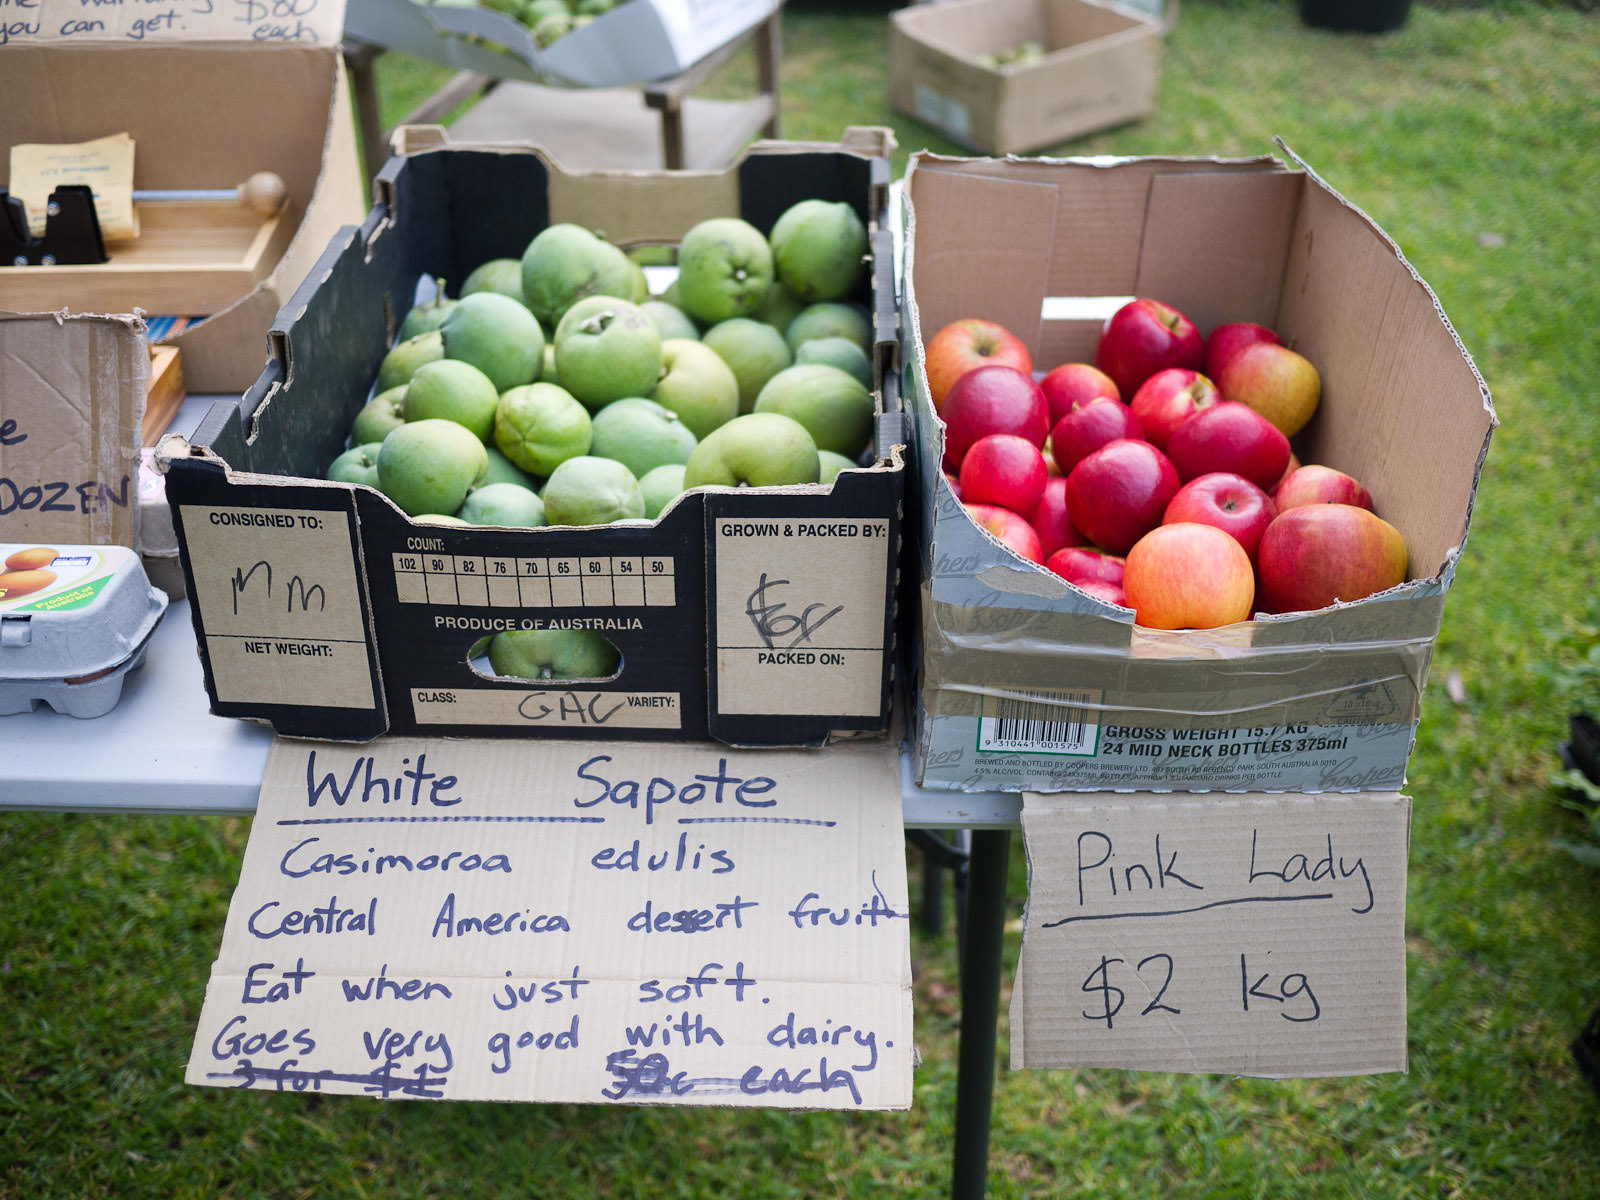 White sapote and pink lady apples